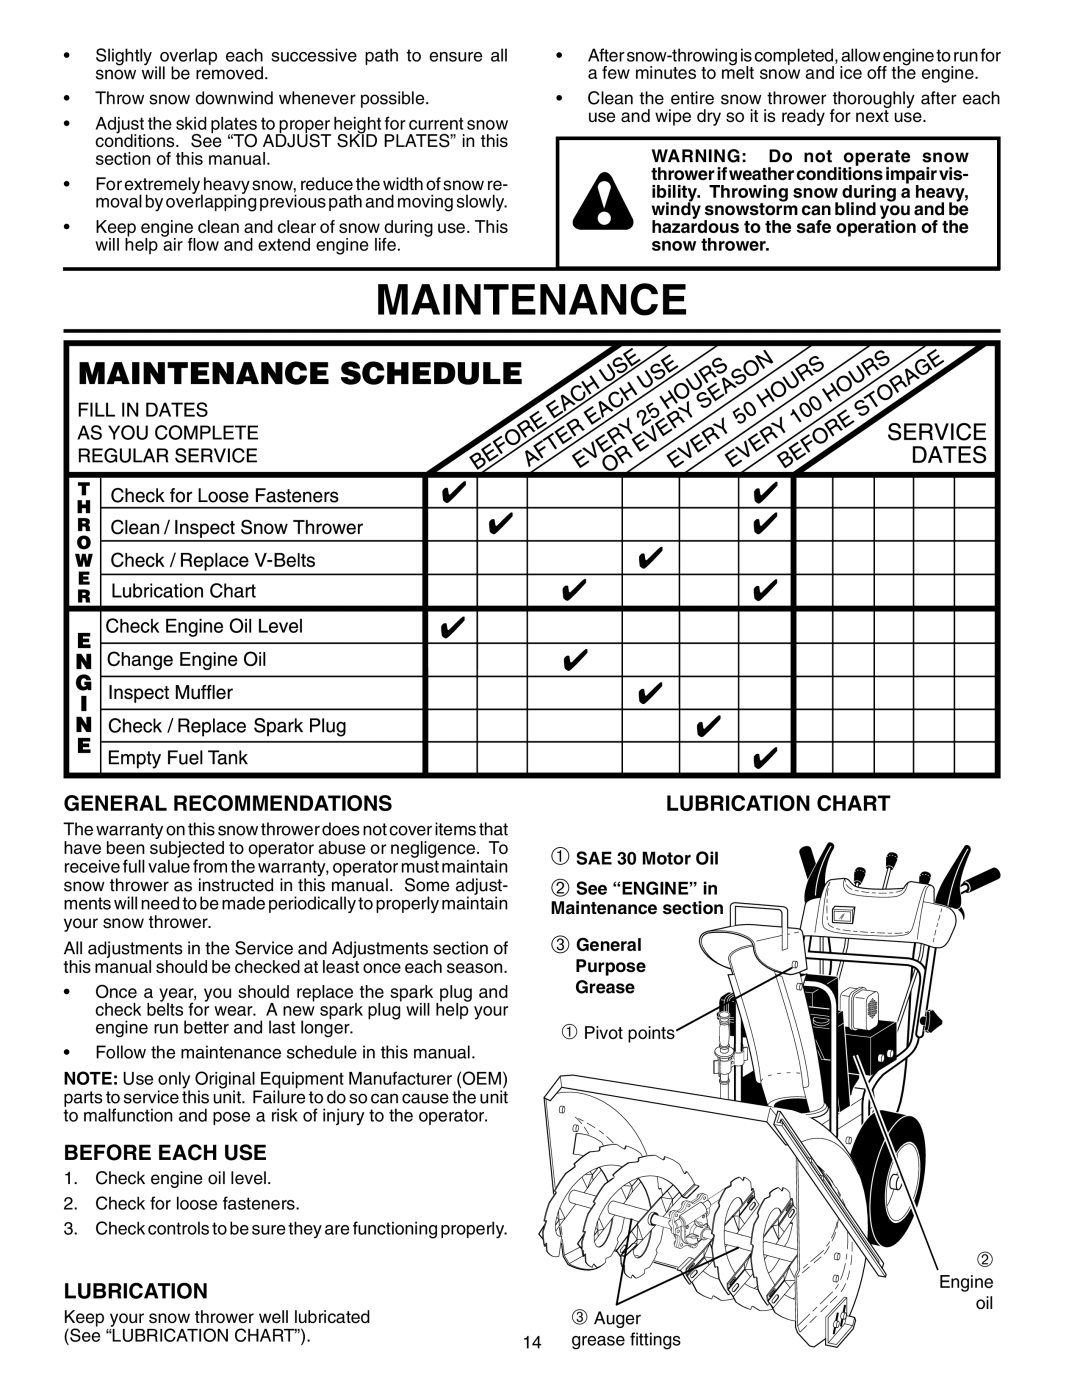 Husqvarna 1330SBEXP owner manual Maintenance, General Recommendations, Before Each USE, Lubrication 